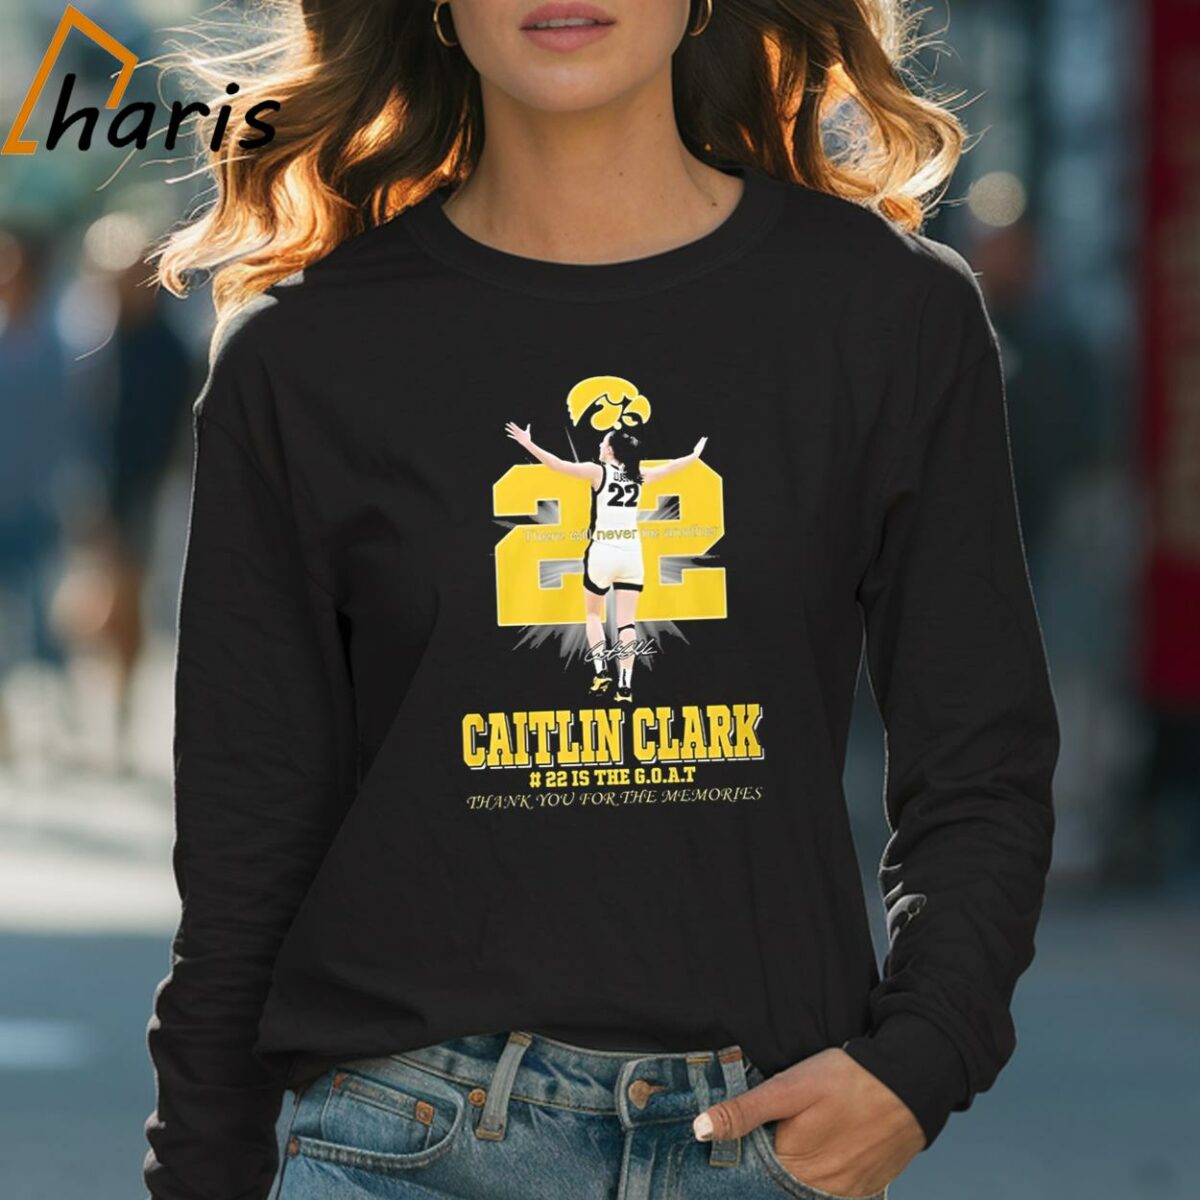 Caitlin Clark 22 Is The GOAT Thank You For The Memories Signature T shirt 4 Long sleeve shirt